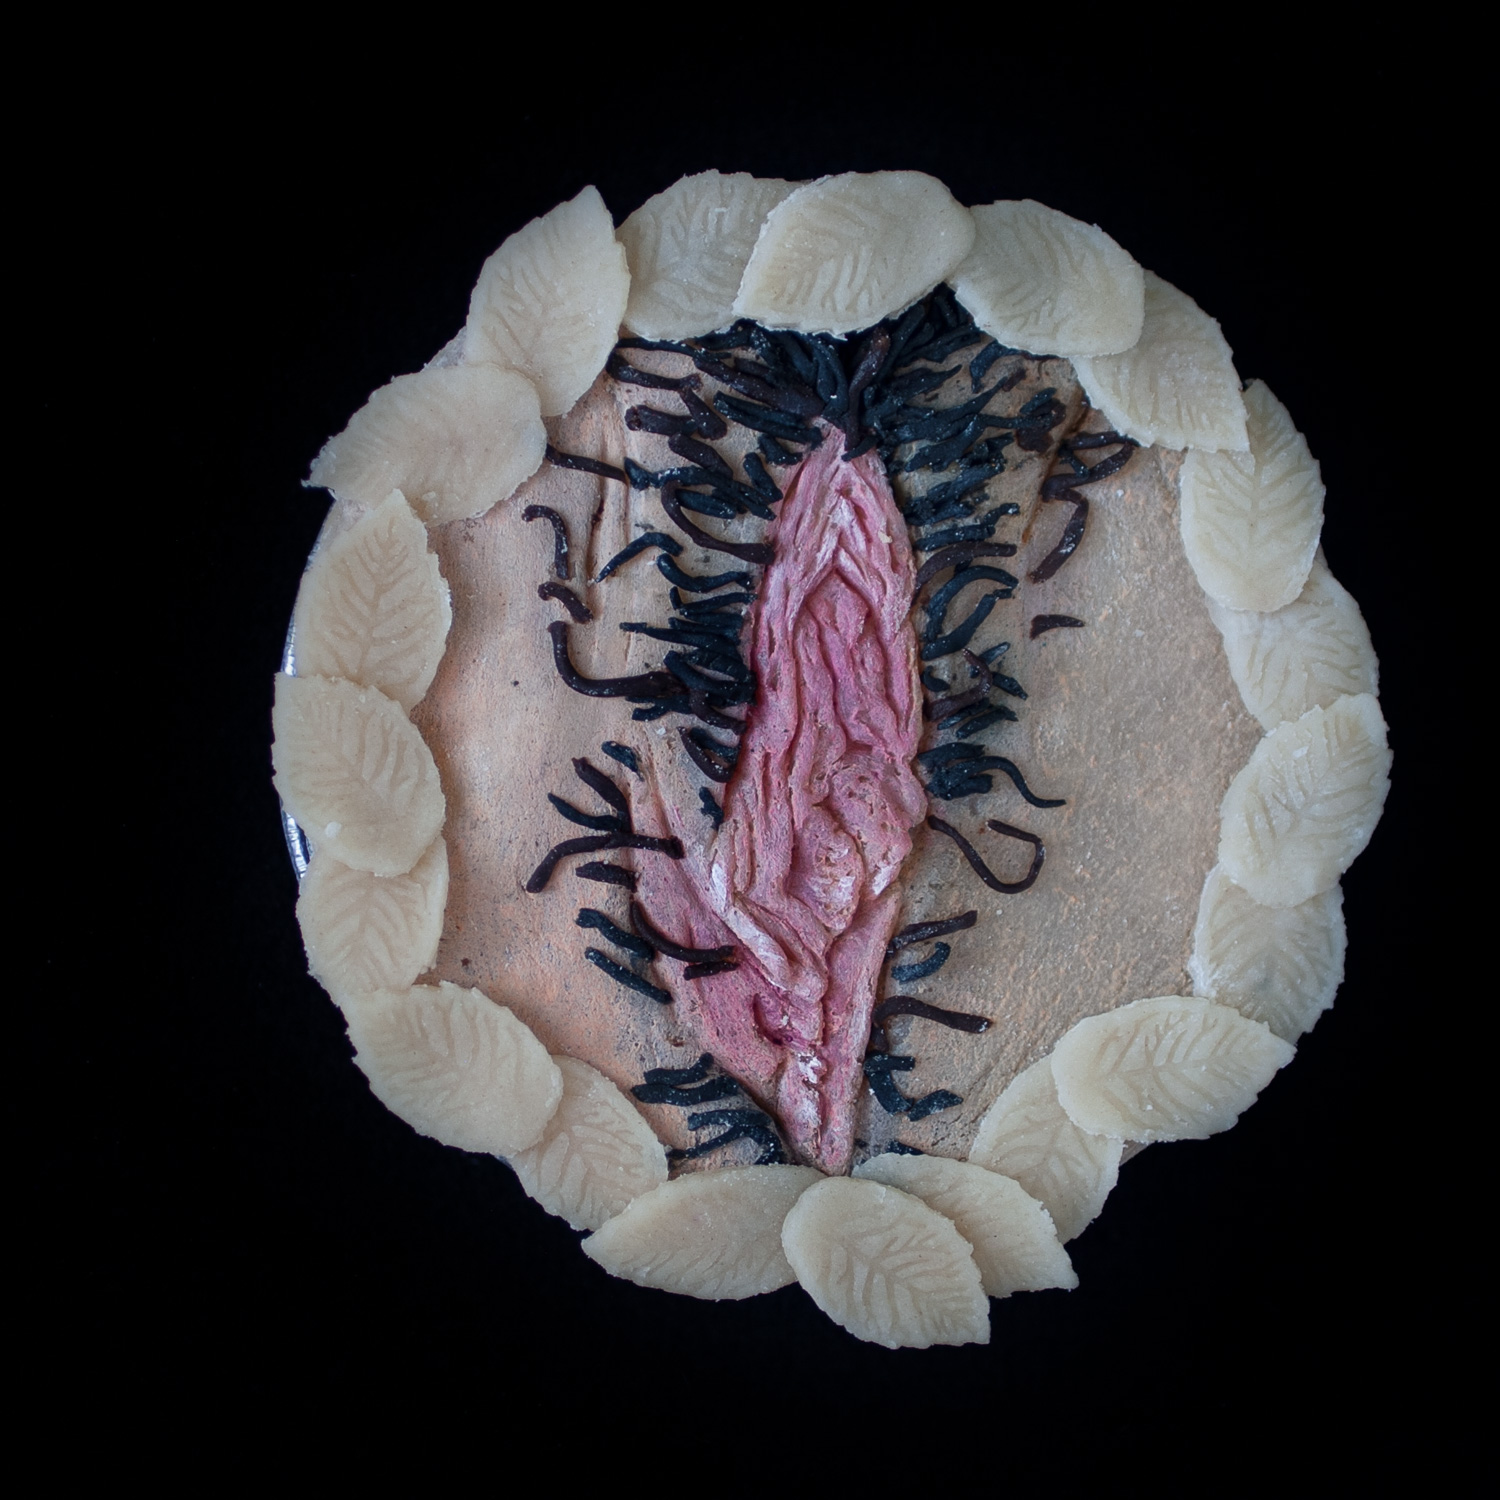 A vulva pie for Pies in the Window on a black background. The Pie features hand-sculpted pie crust art and pubic hair surrounded my pie dough leaves. 